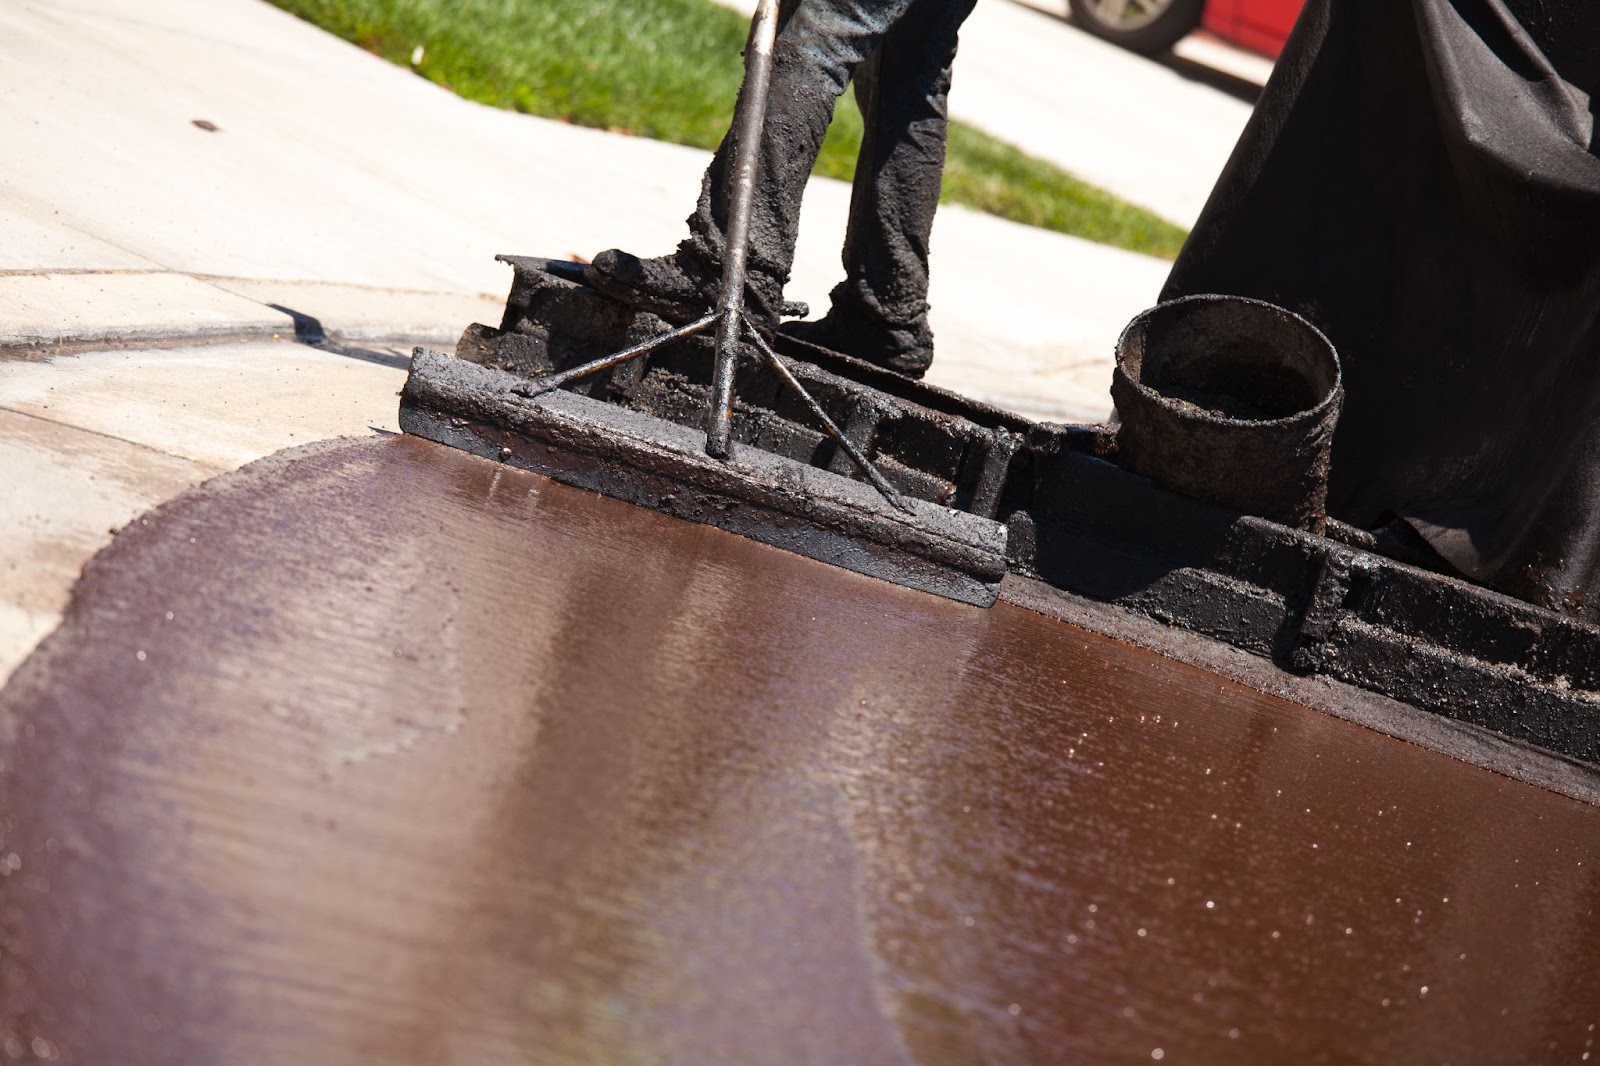 A close-up view of a road worker's legs and feet in black pants and shoes, resurfacing the street, demonstrating asphalt pavement maintenance.